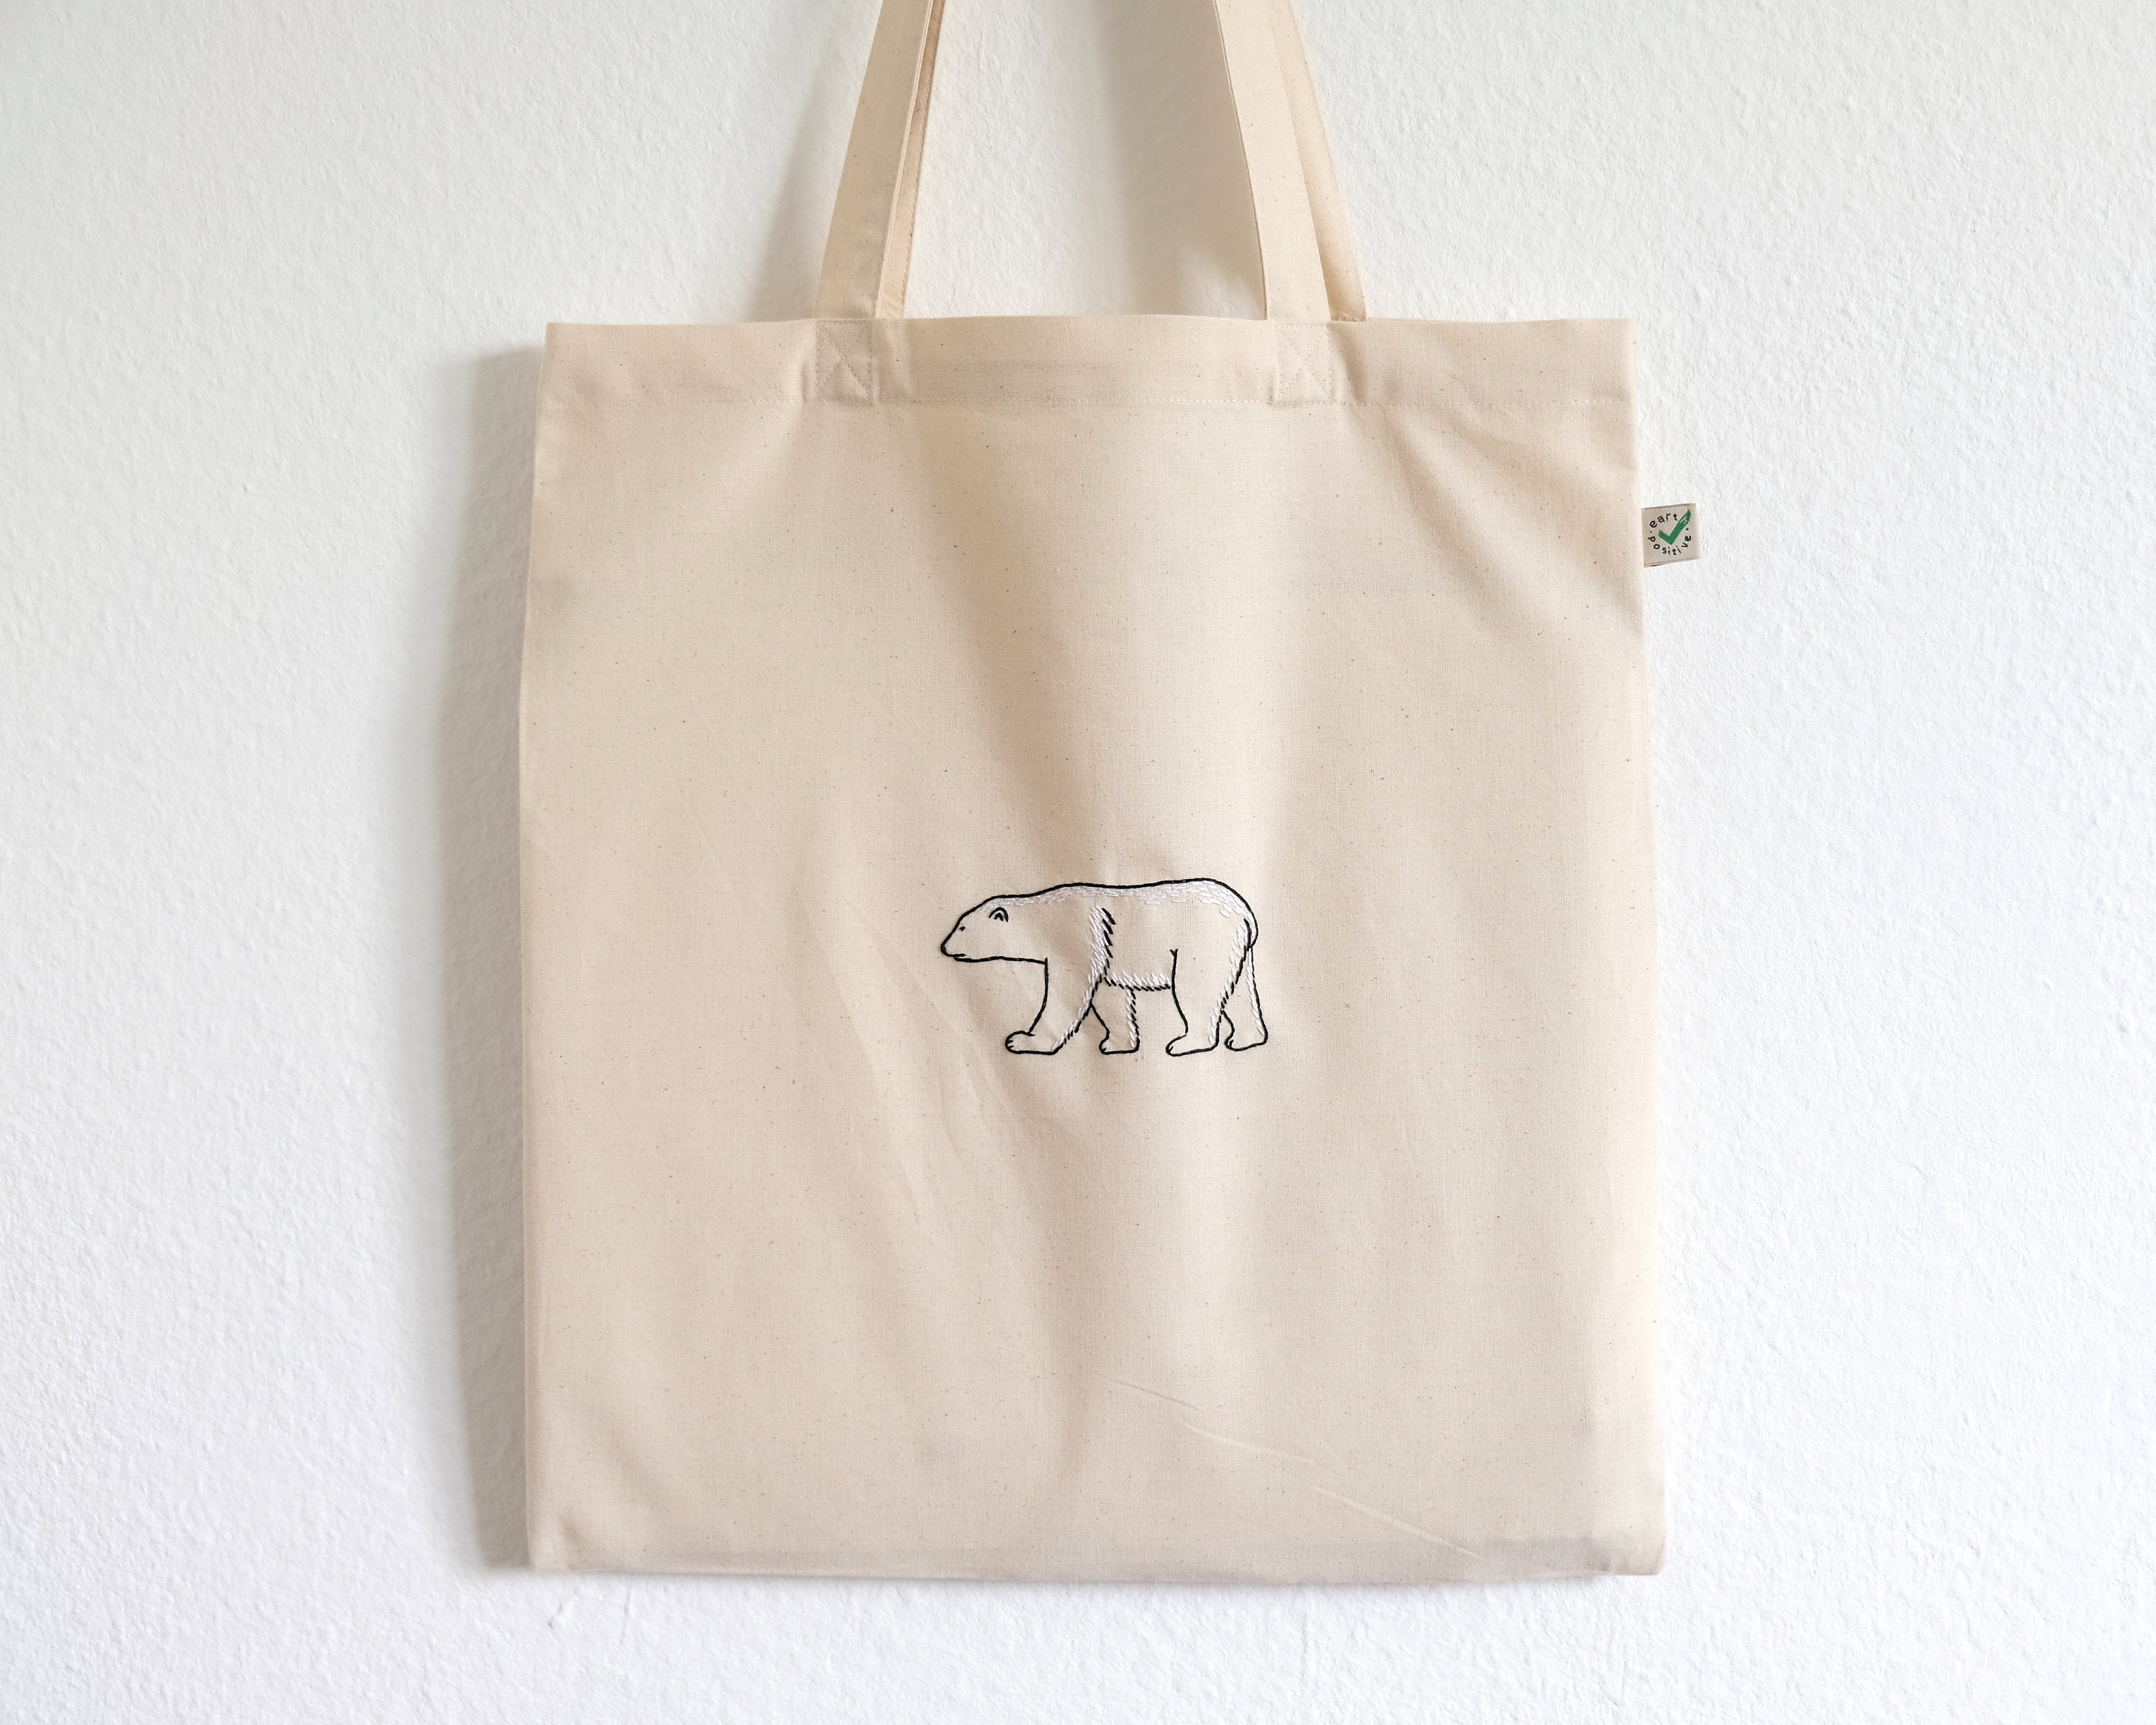 Pack of 10 Premium Plain Natural Cotton Shopping Tote Bags Eco Friendly  Shoppers Ideal for Printing and Decorating